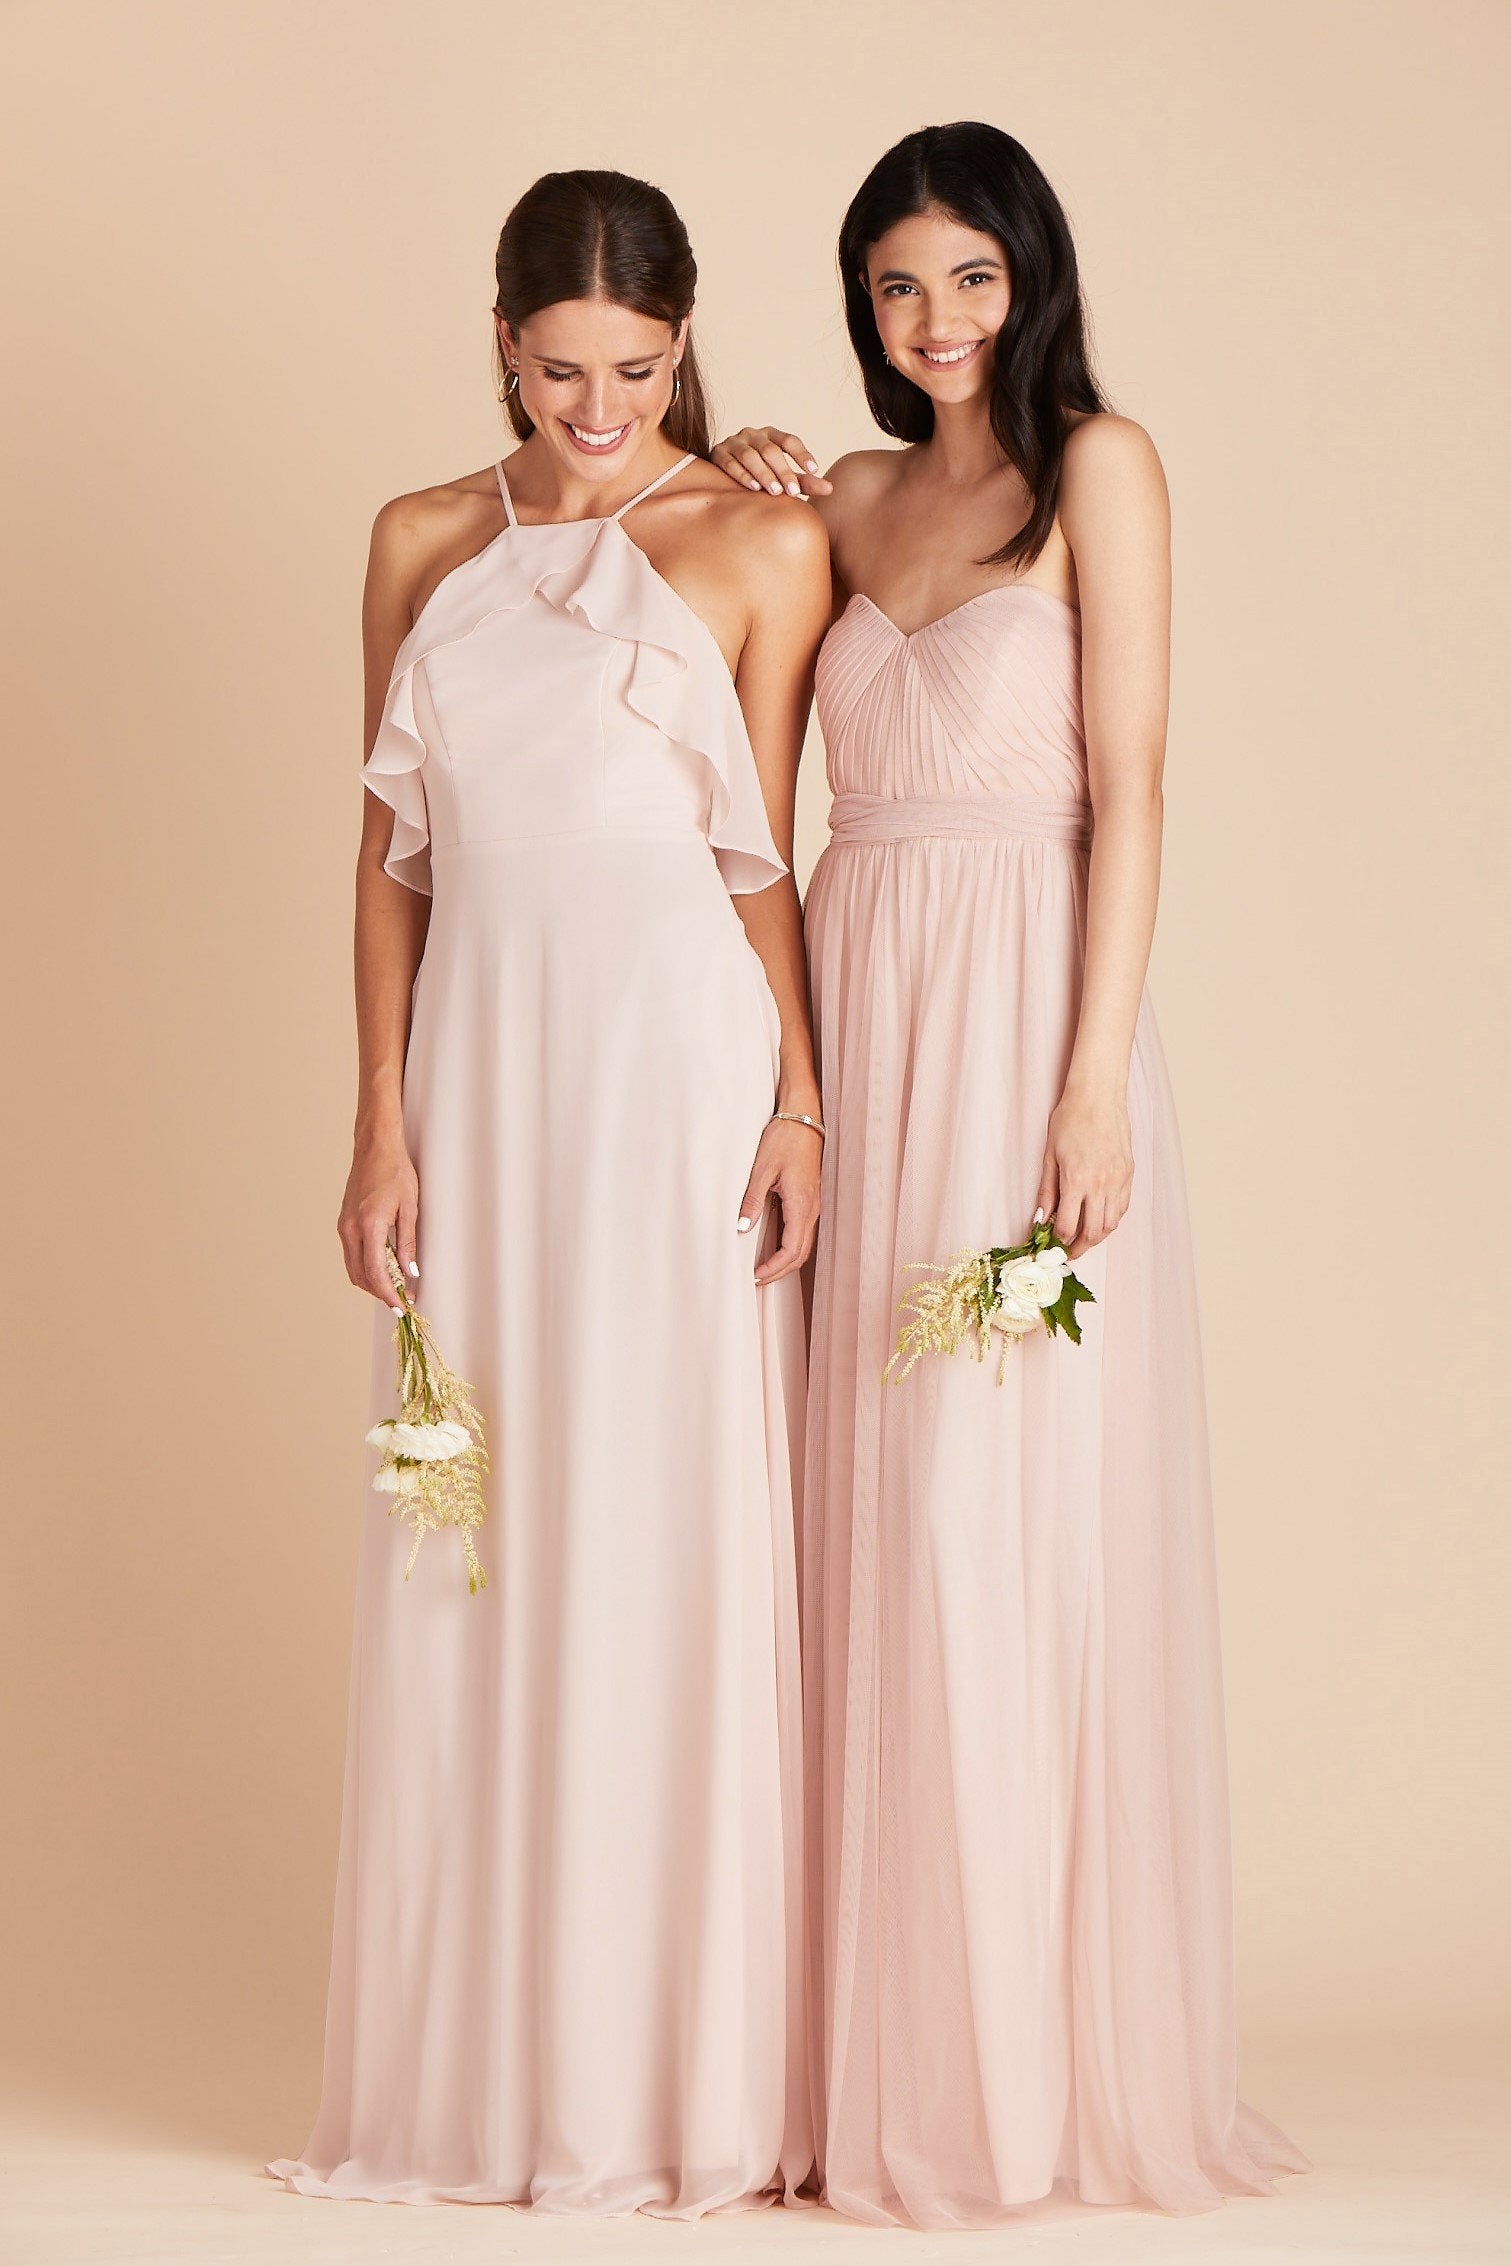 Jules bridesmaid dress in pale blush chiffon by Birdy Grey, front view